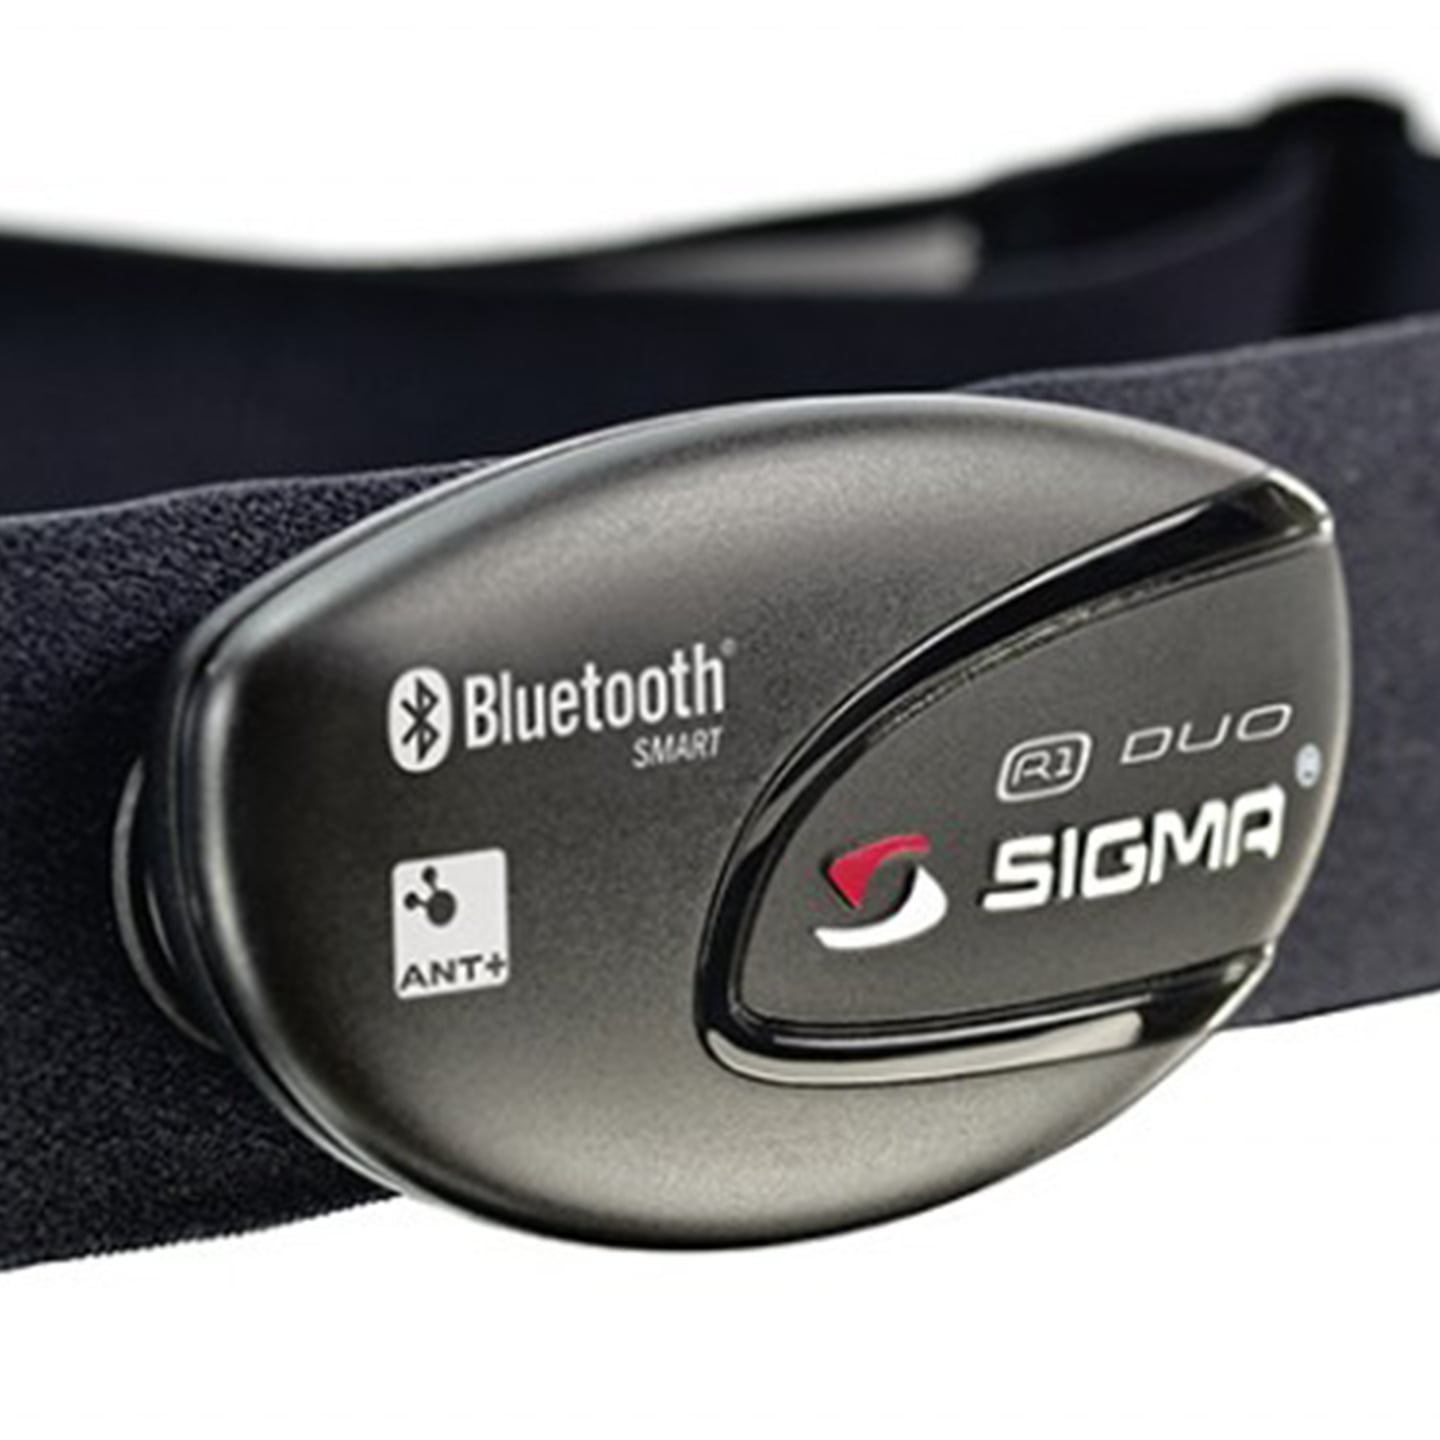 SIGMA R1 Duo Transmitter with Chest Strap Heart Rate Monitor, Bike accessories